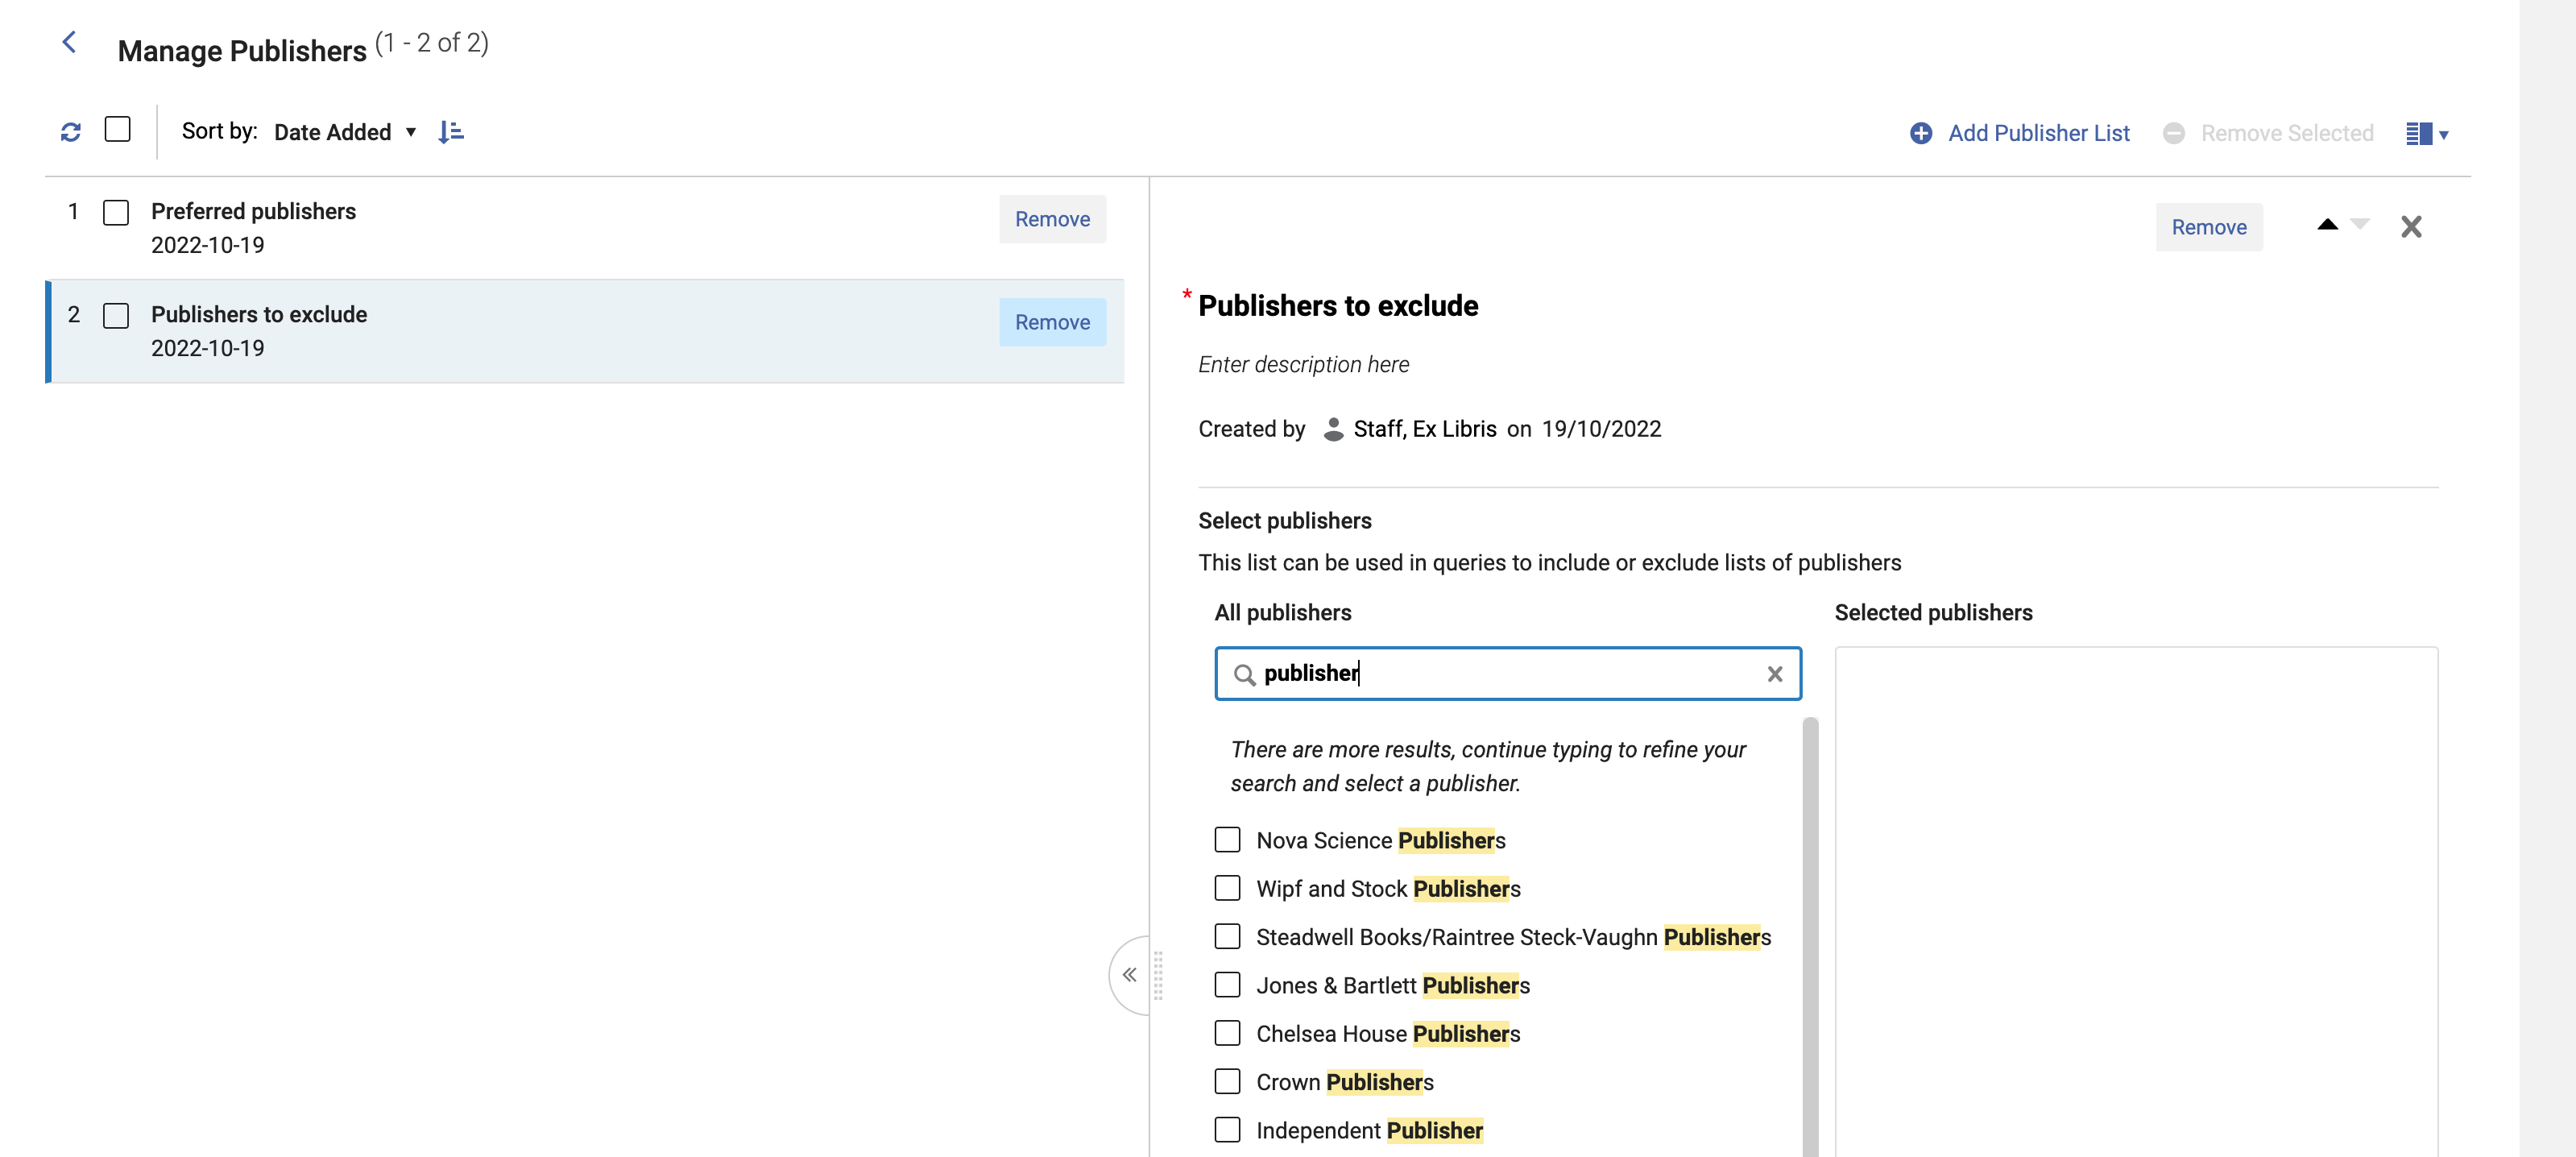 Publisher Lists page (Manage Publishers)